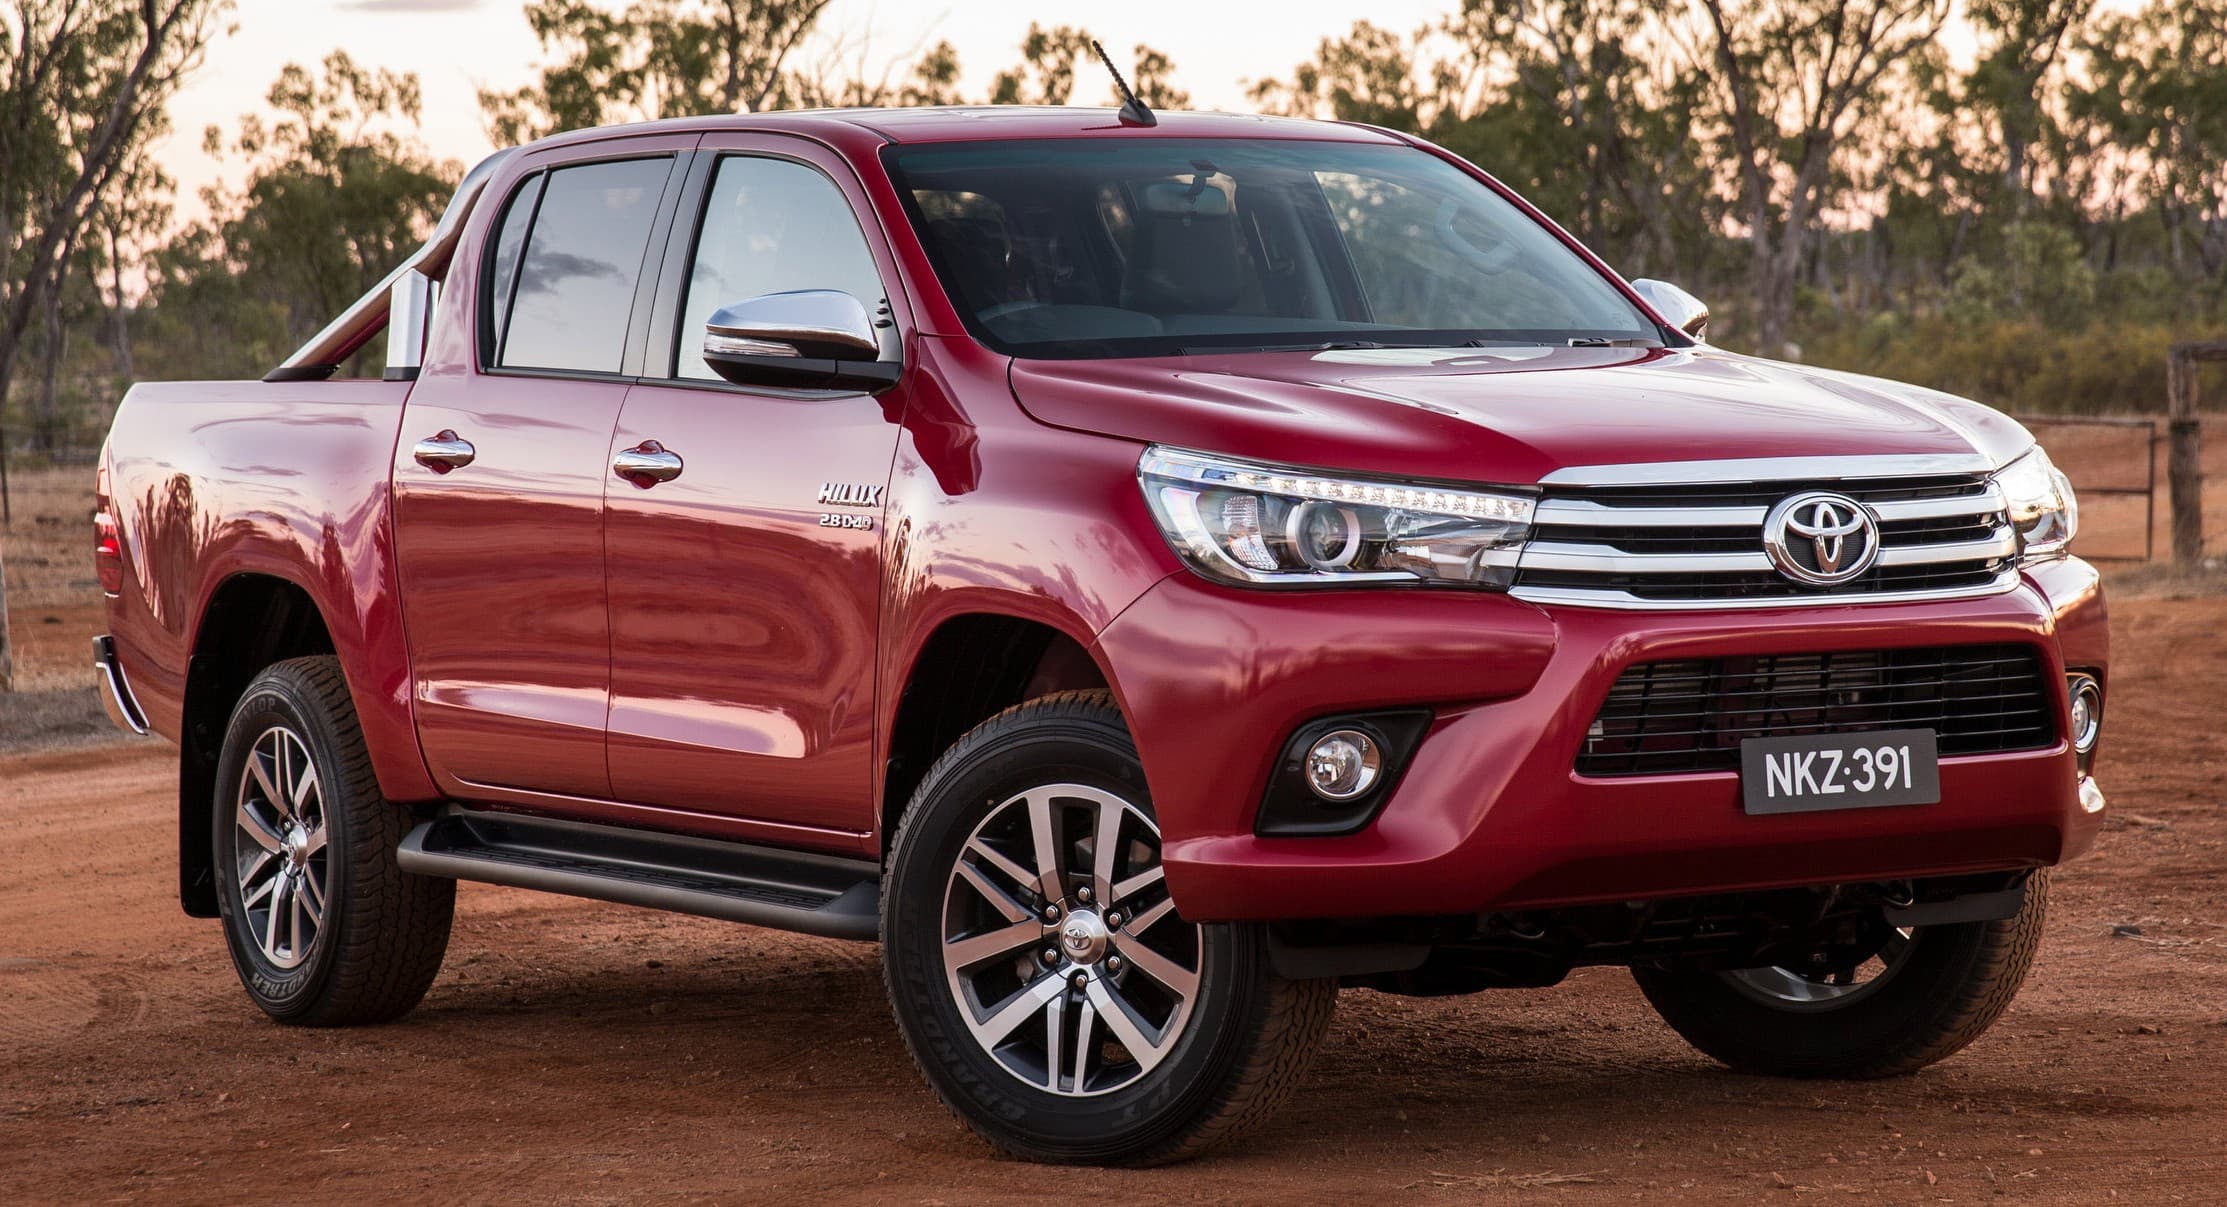 Toyota Hilux 2016 wallpaper HD High Quality Download